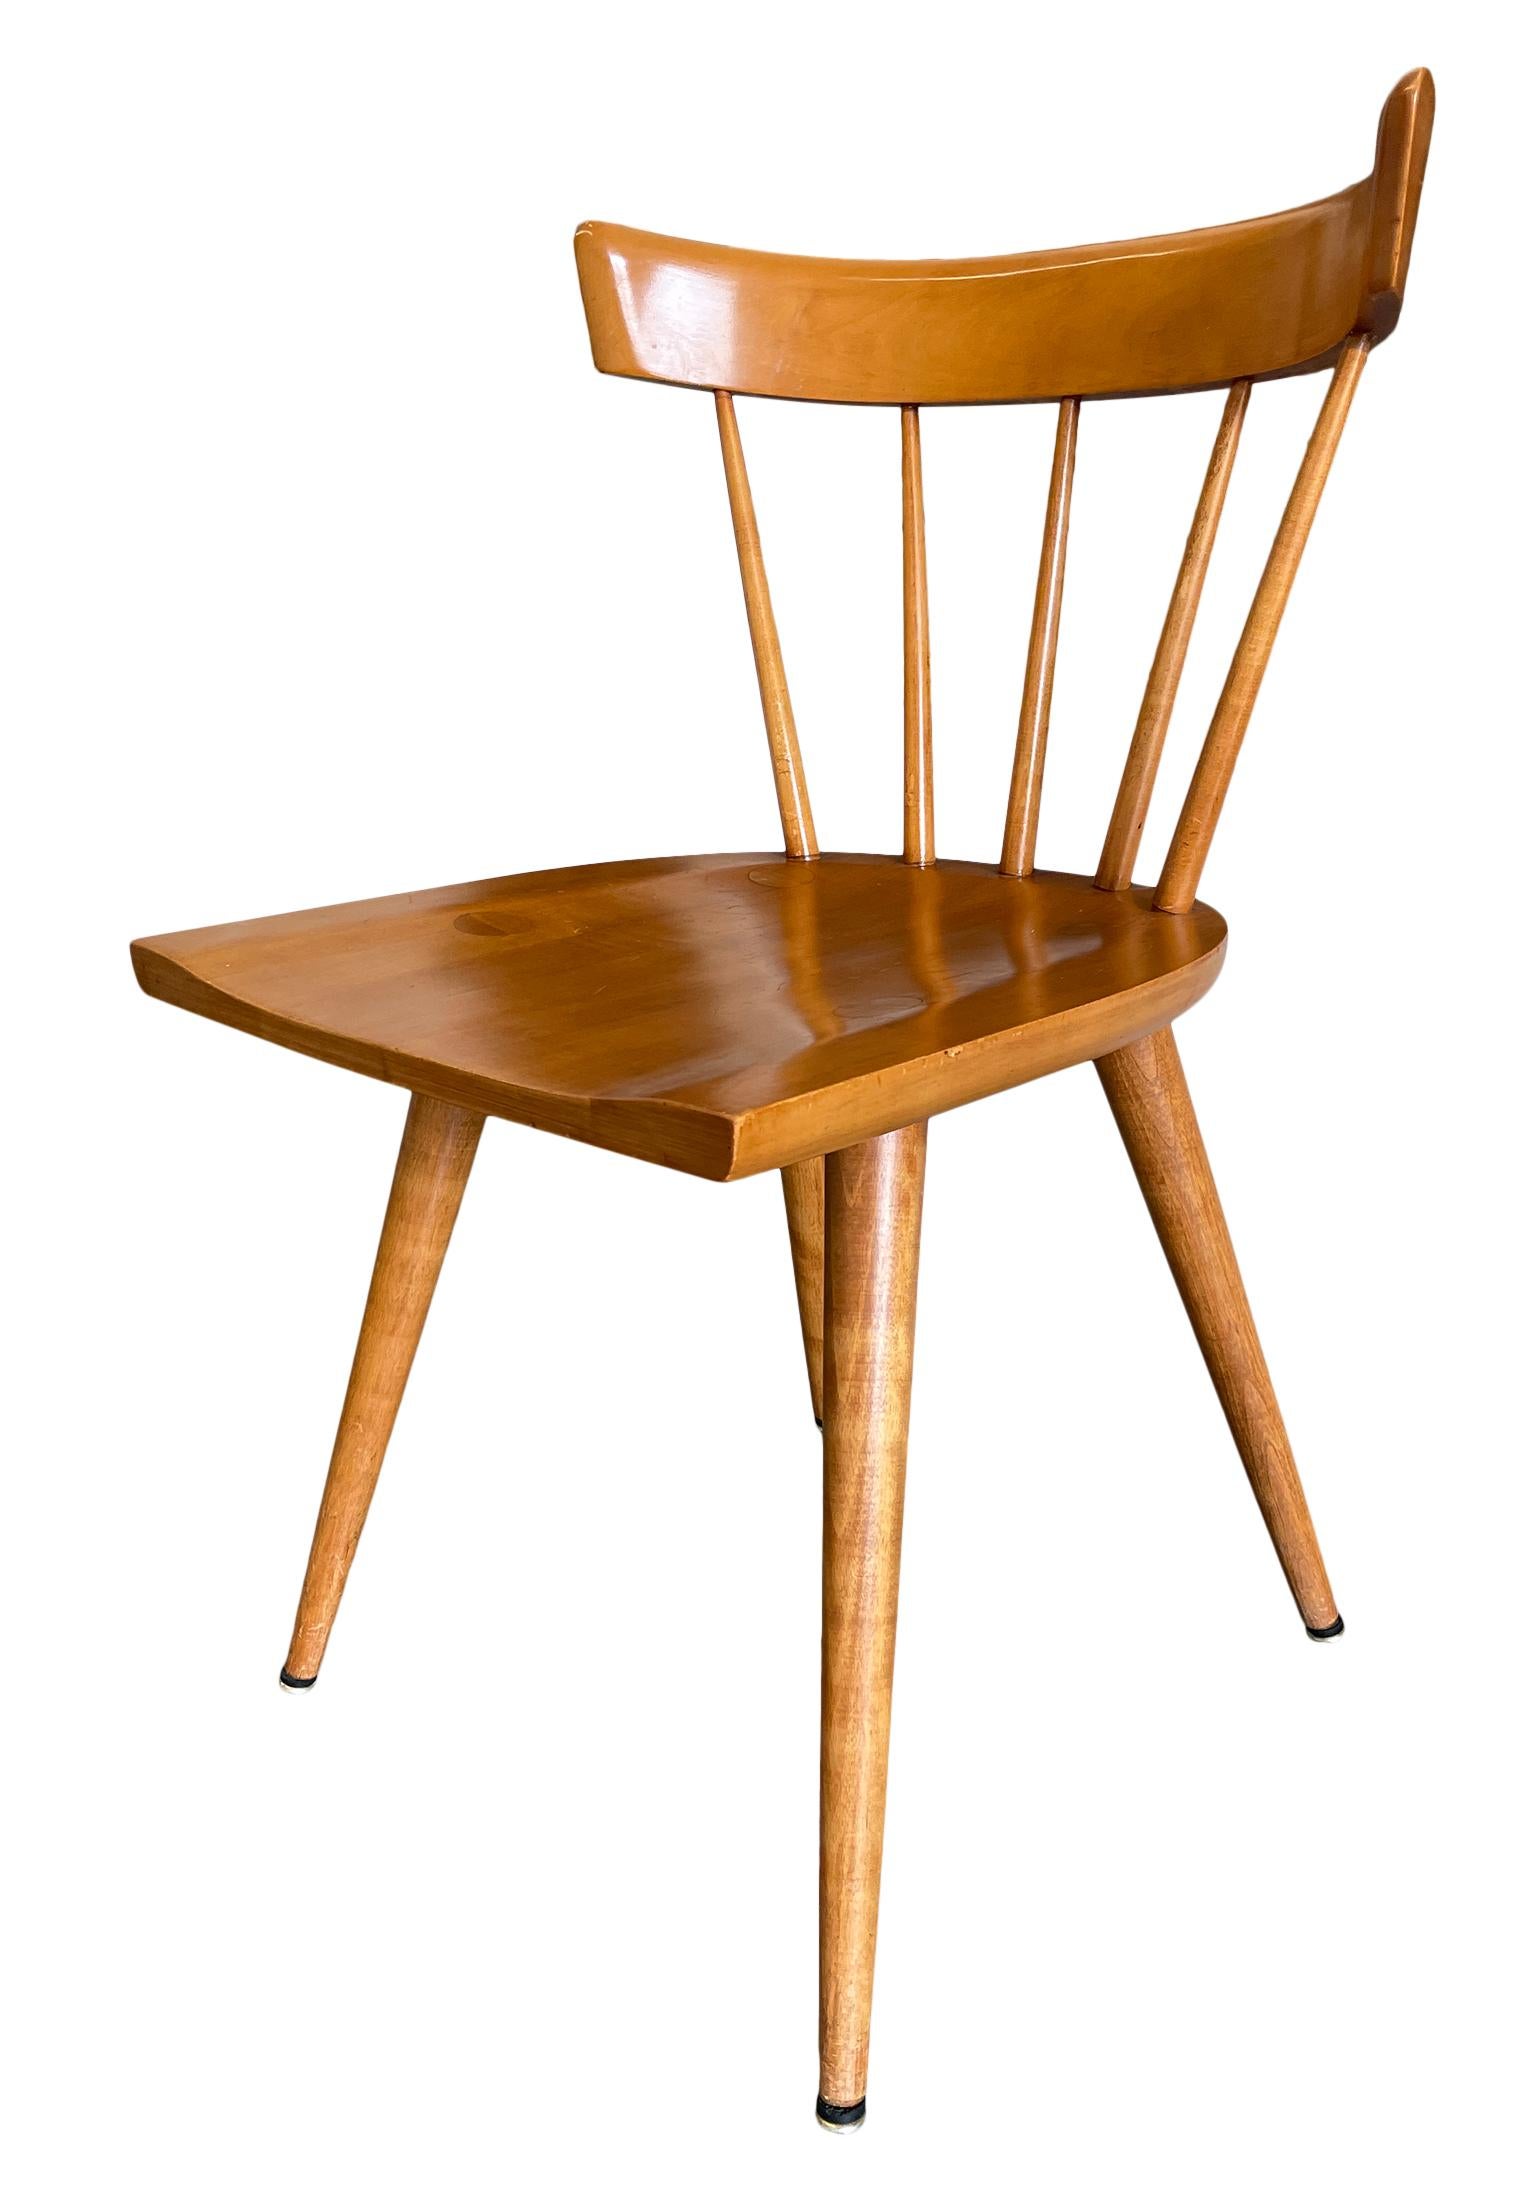 American Mid-Century Paul McCobb Planner Group Dining Chairs Maple Spindle Back Chairs For Sale